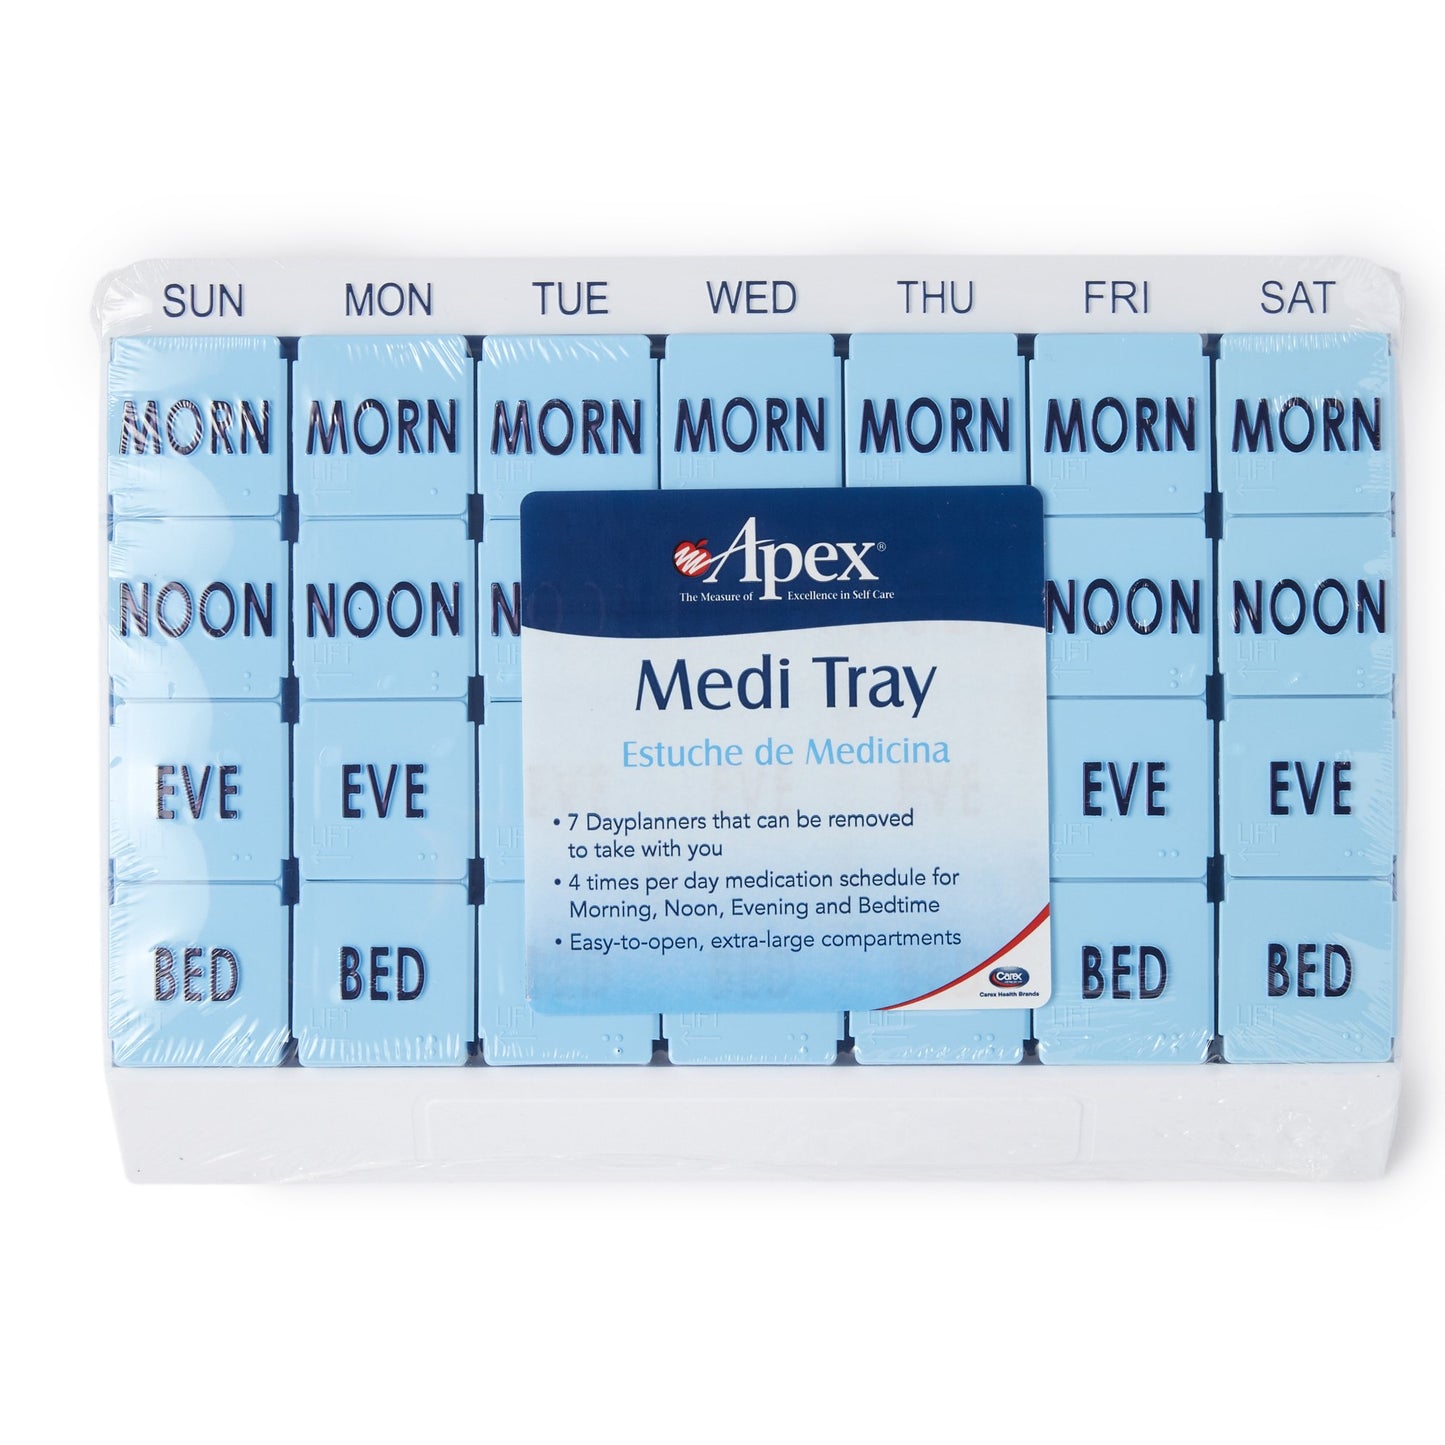 Apex Medi Tray Pill Organizer, Days of the Week / Morn, Noon, Eve, Bed